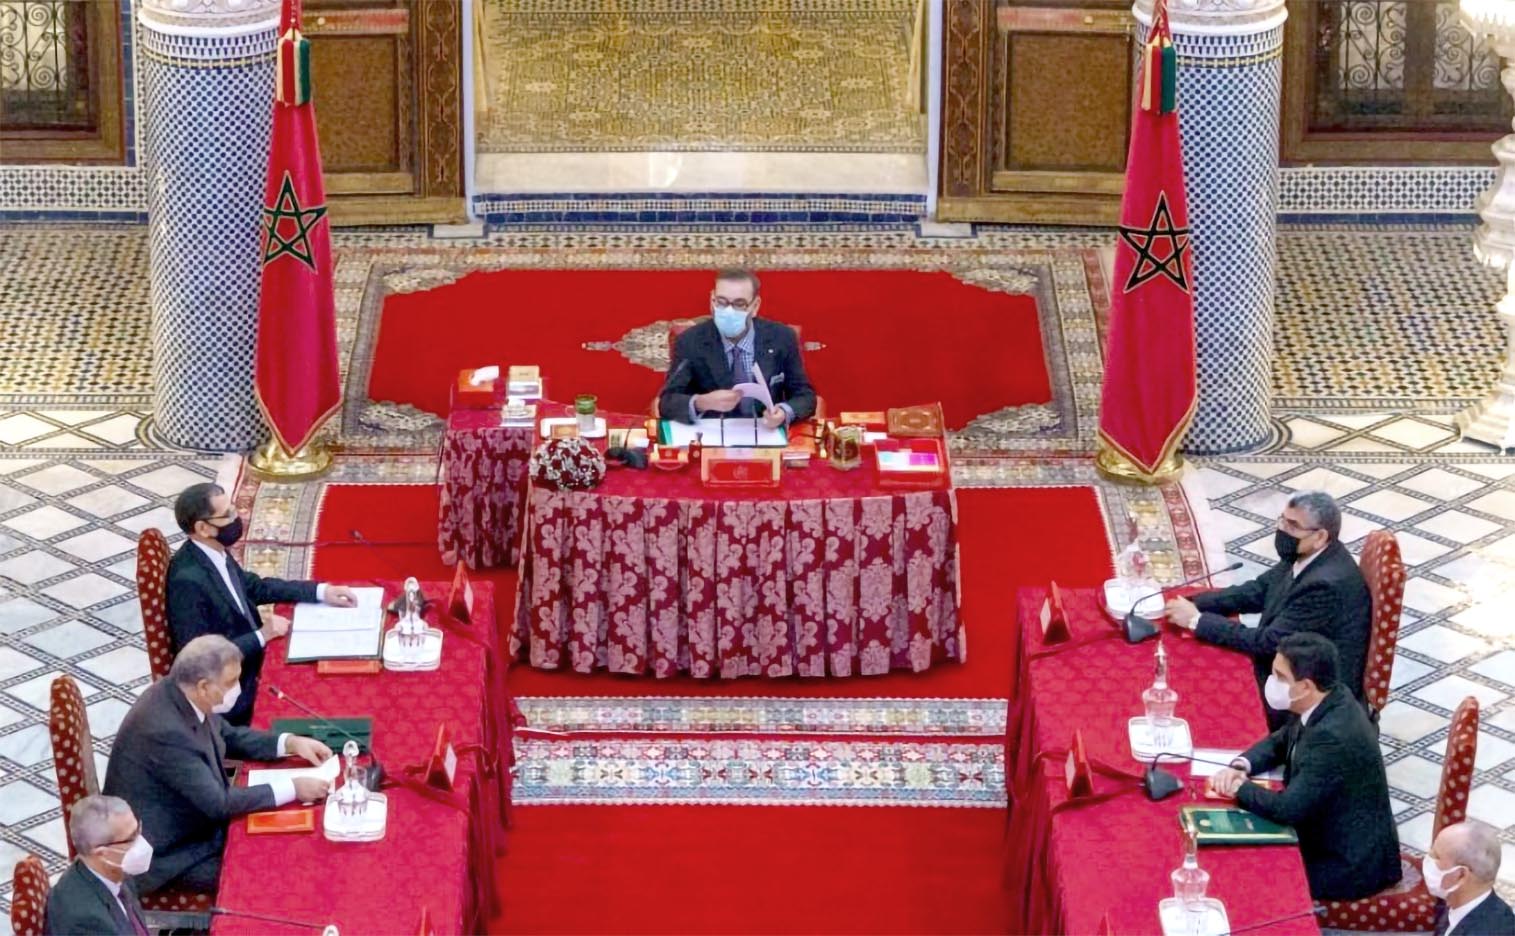 HM King Mohammed VI Inquires of Minister of Interior about the Tangier Factory Tragedy